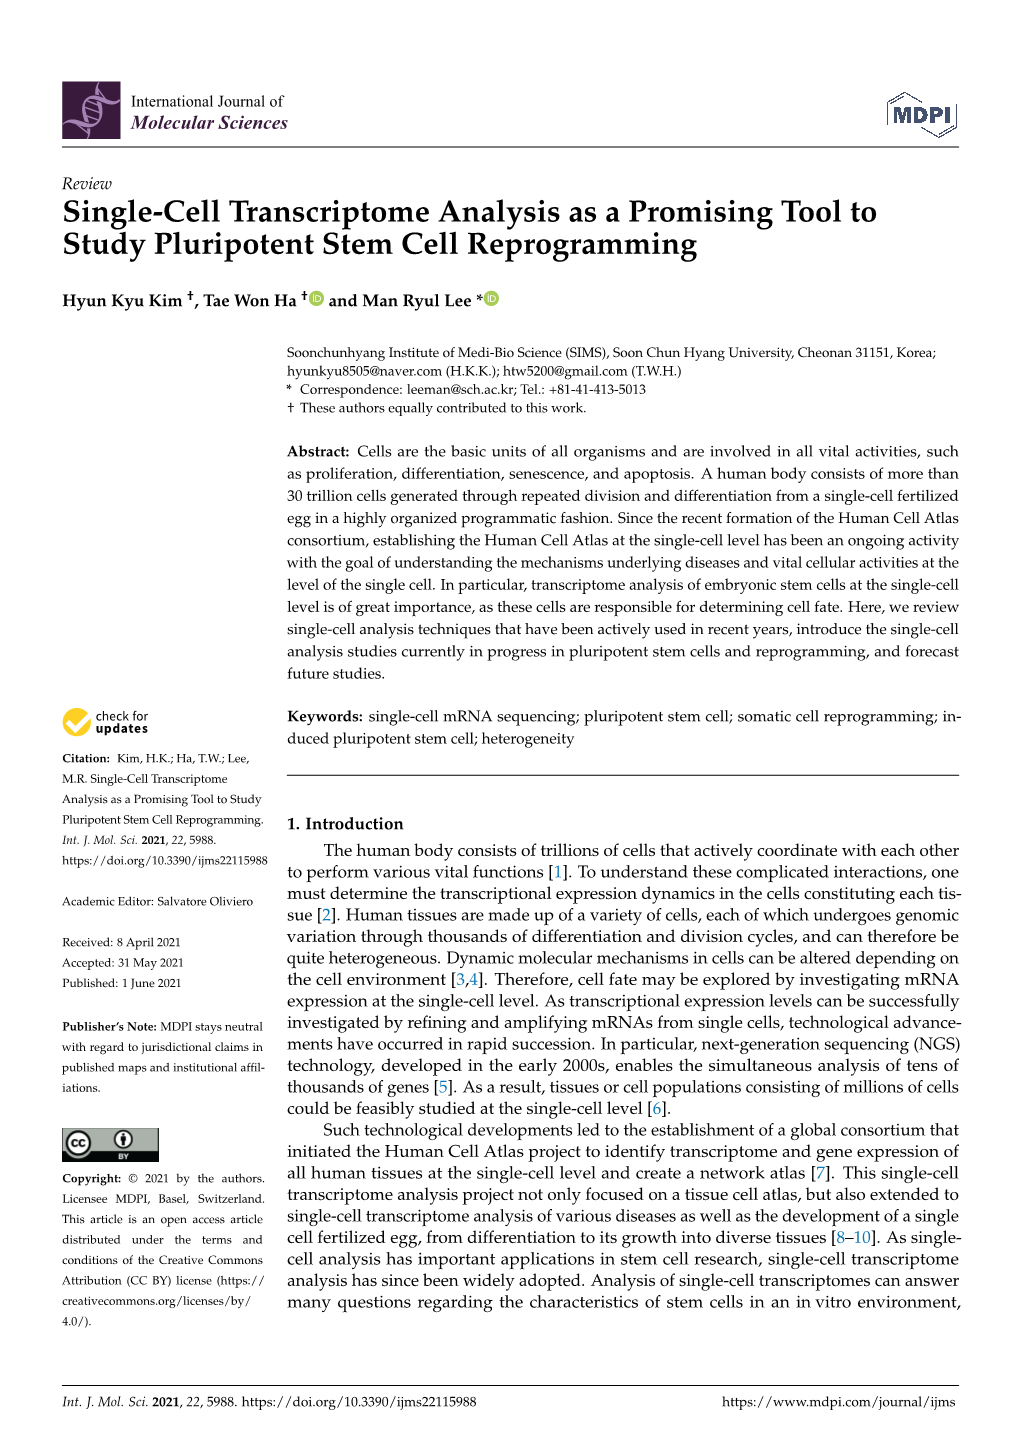 Single-Cell Transcriptome Analysis As a Promising Tool to Study Pluripotent Stem Cell Reprogramming